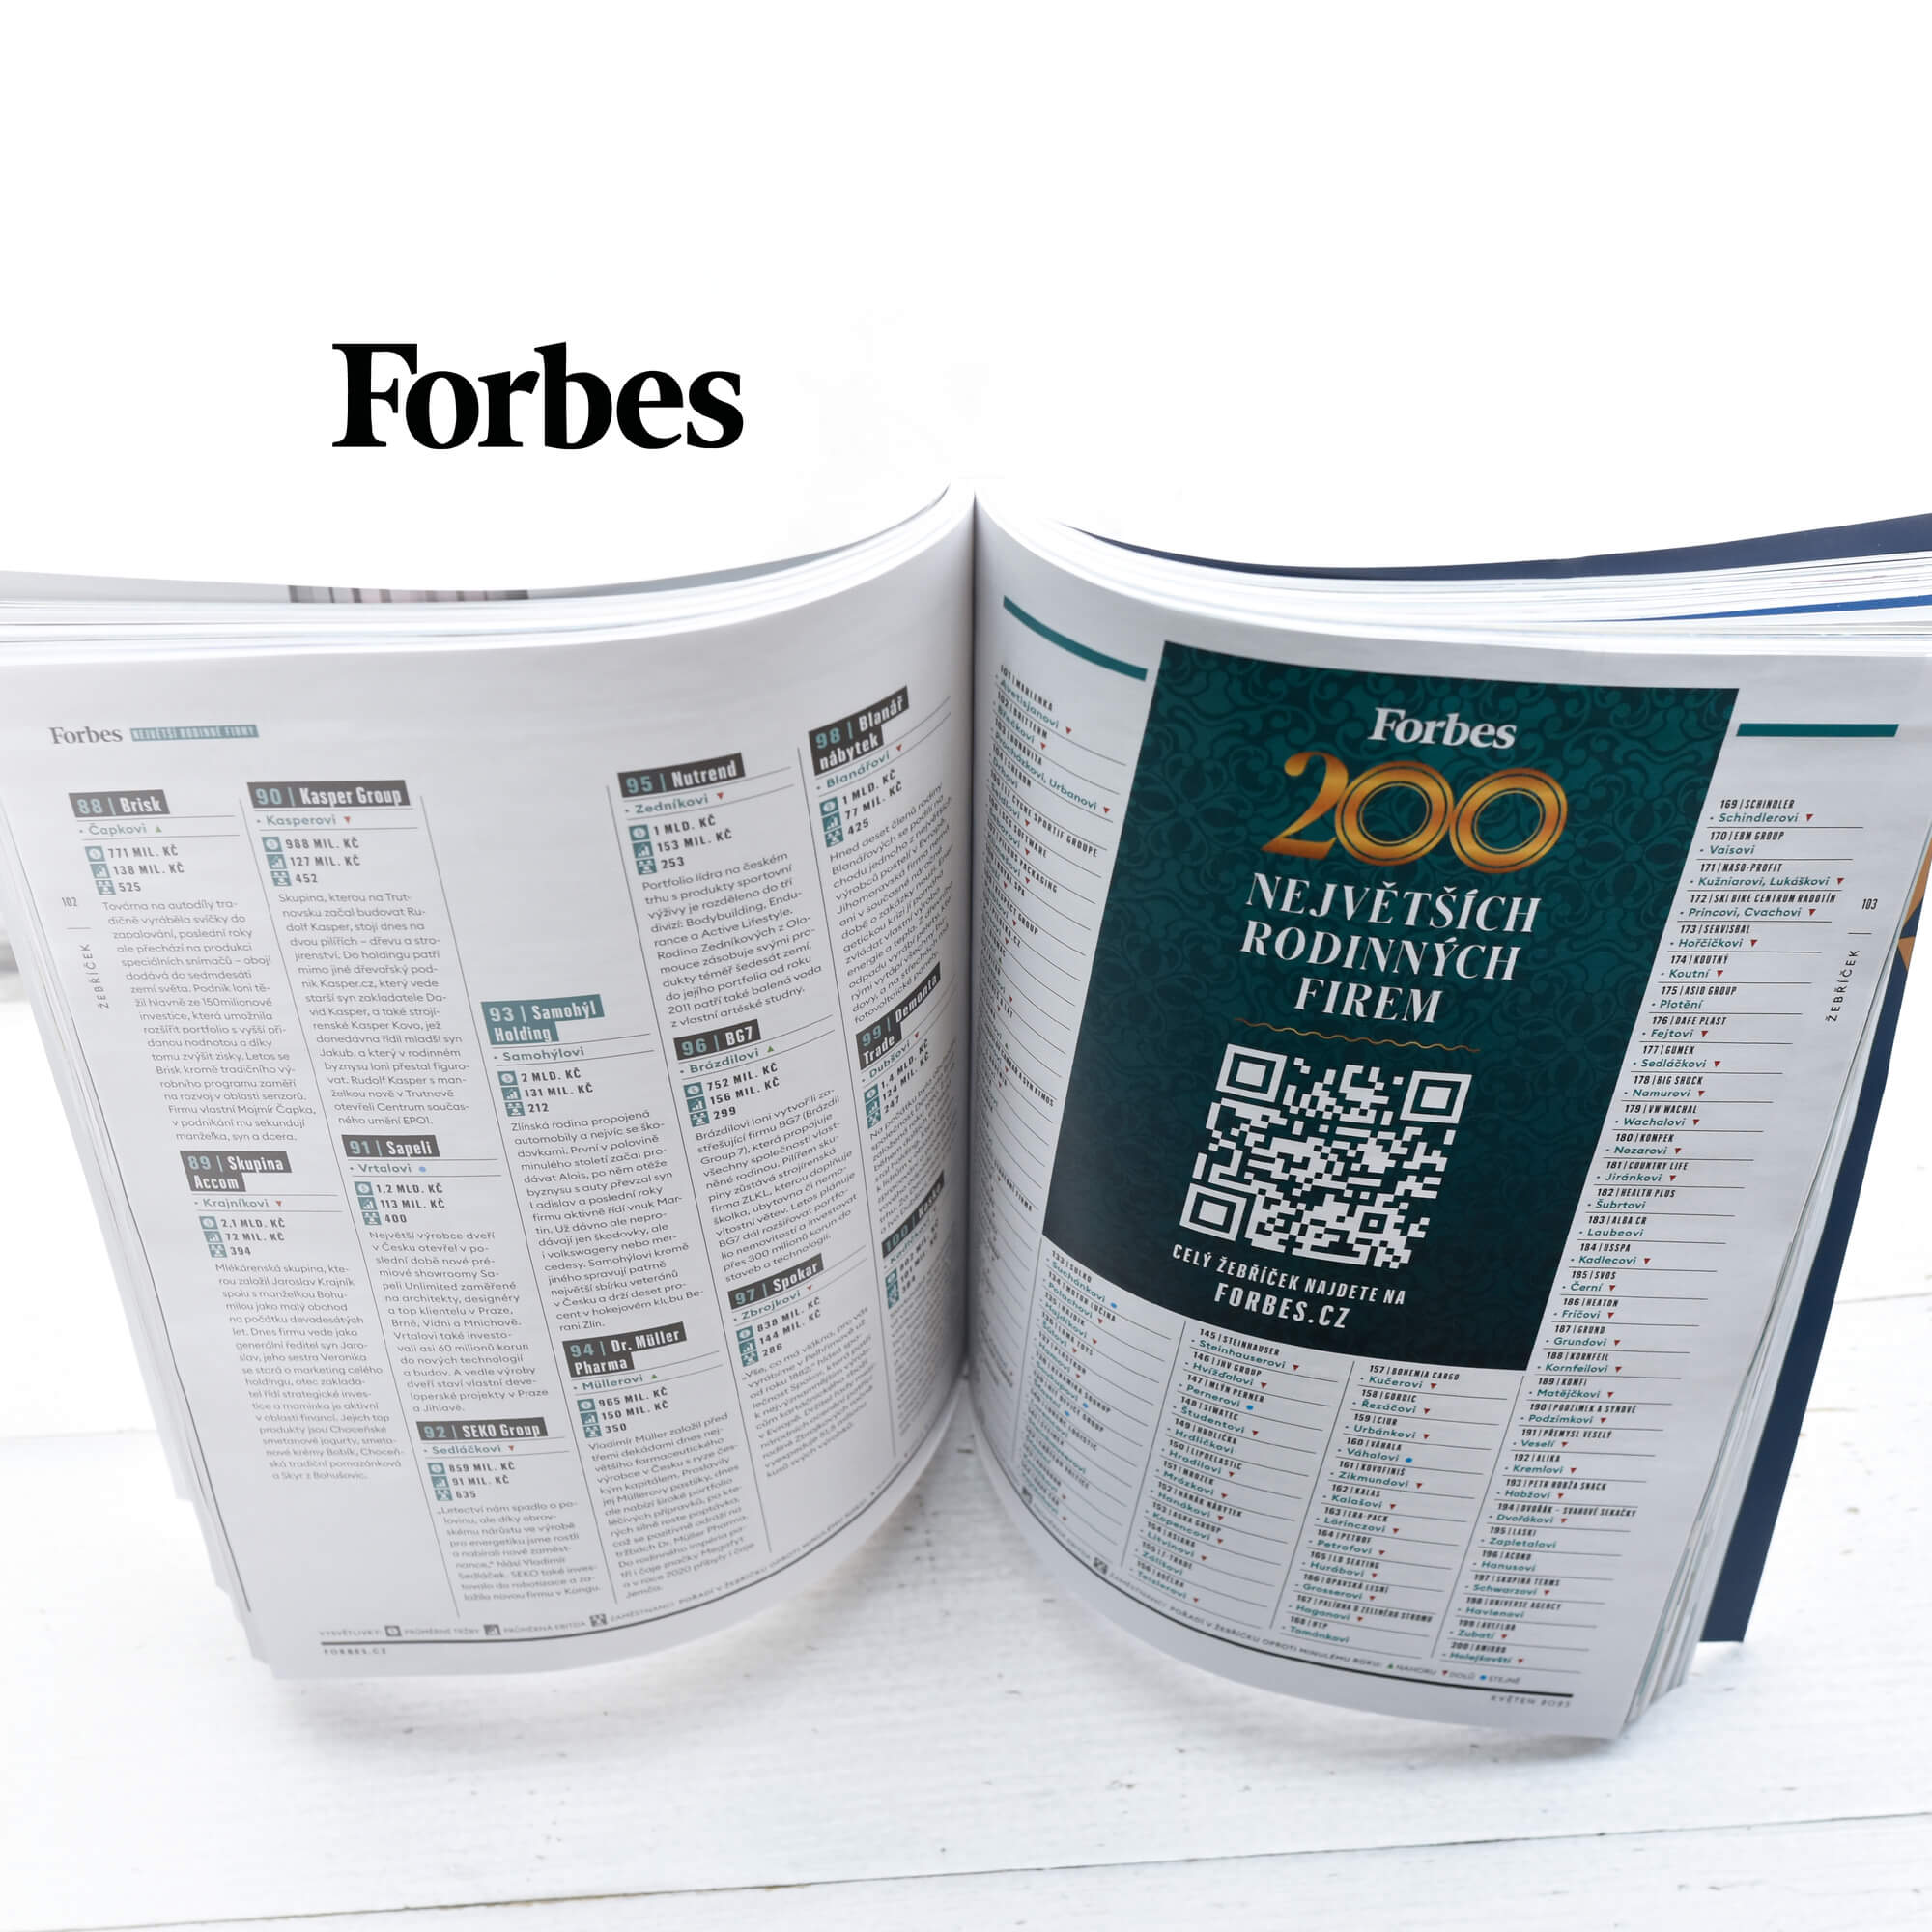 LIKO-S in the Forbes ranking of the 200 biggest family-owned companies in the Czech Republic